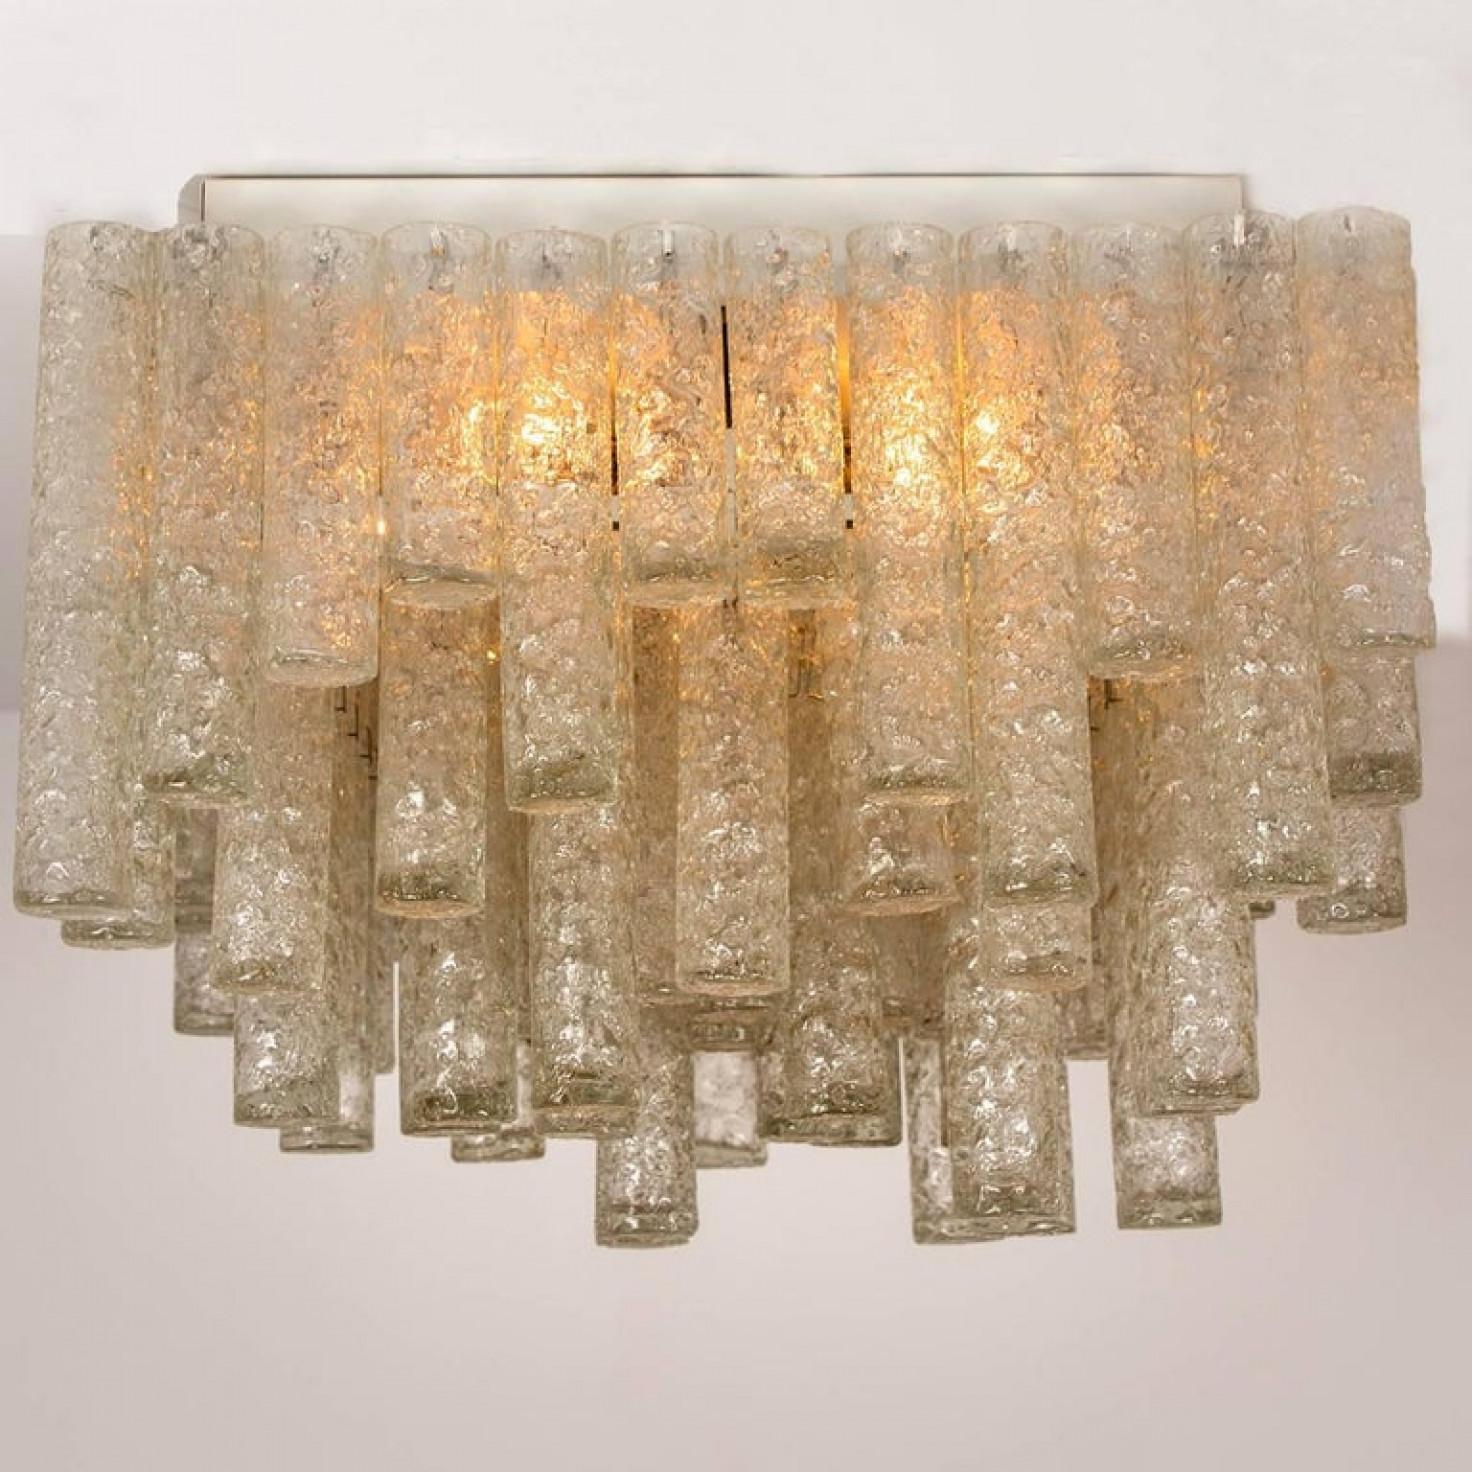 Huge Modern Clean Square Blown Flush Mount Light Fixture from Doria, 1960s For Sale 2